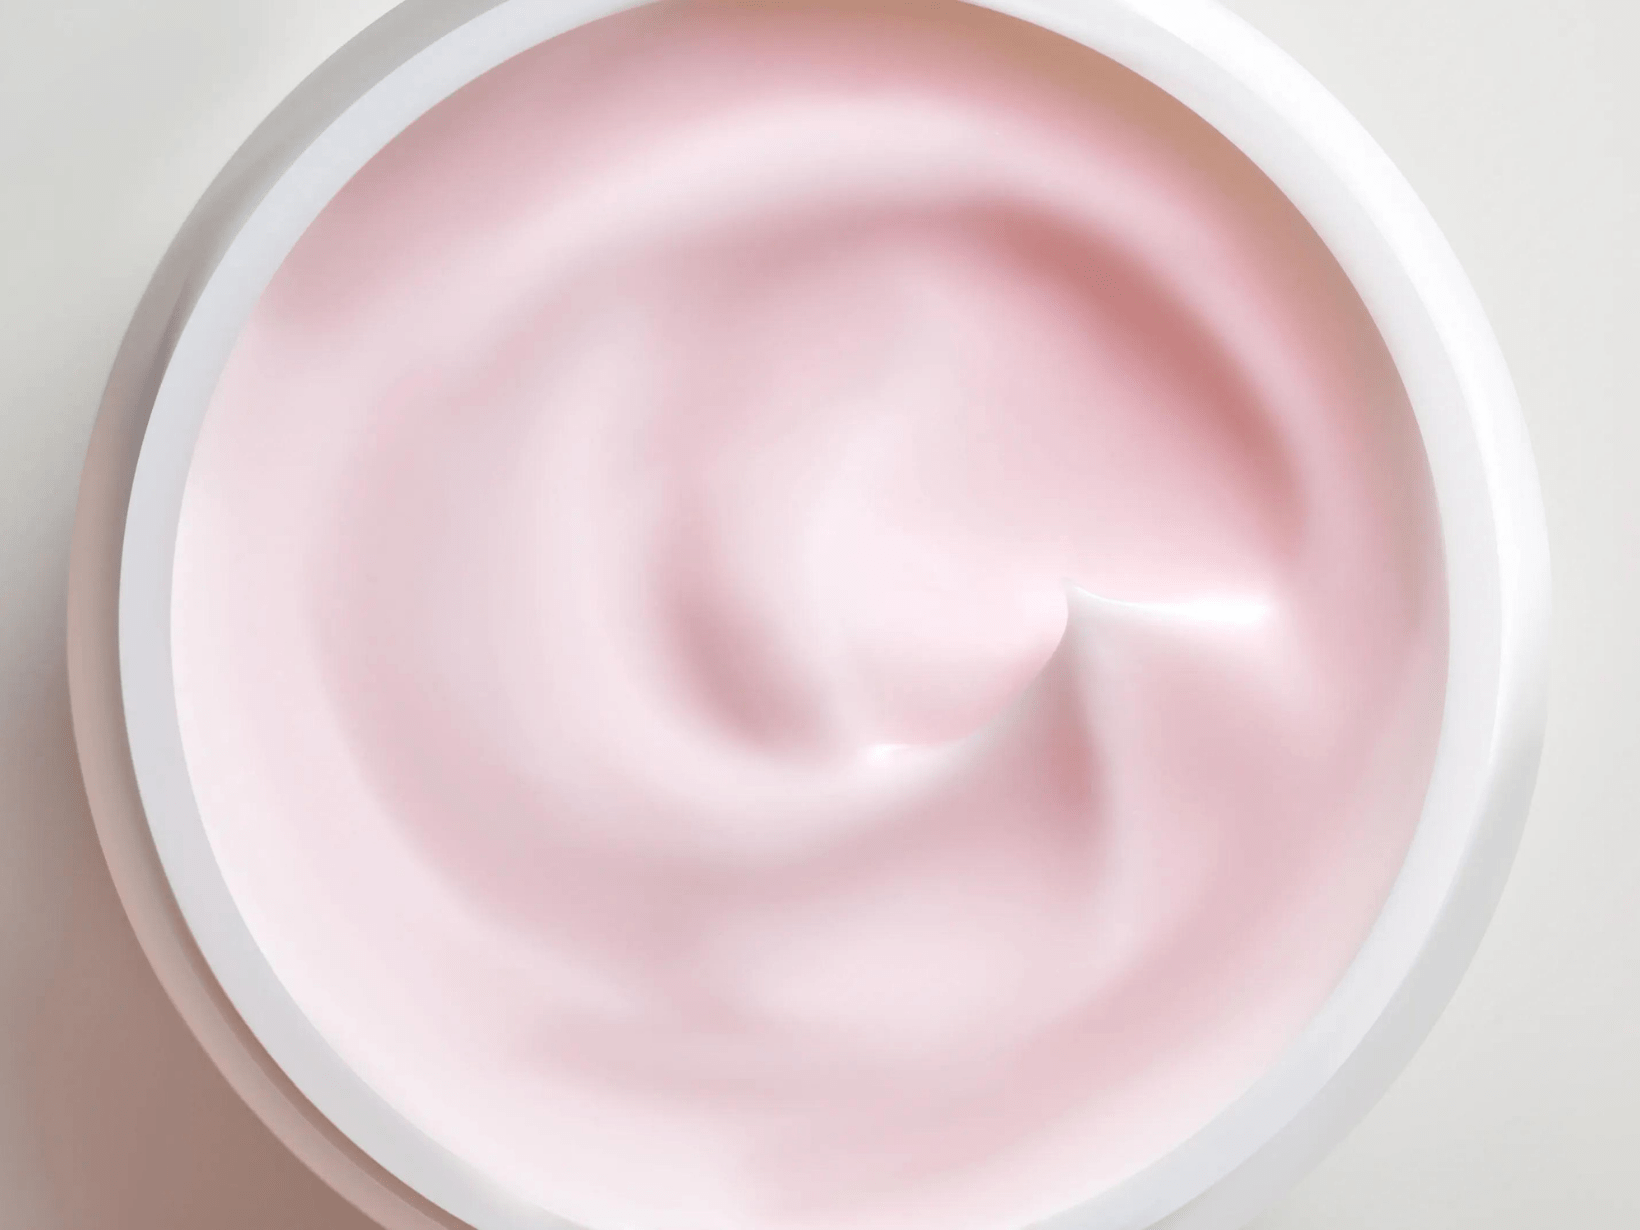 rose water face cream by nivea surrounded by rose petals